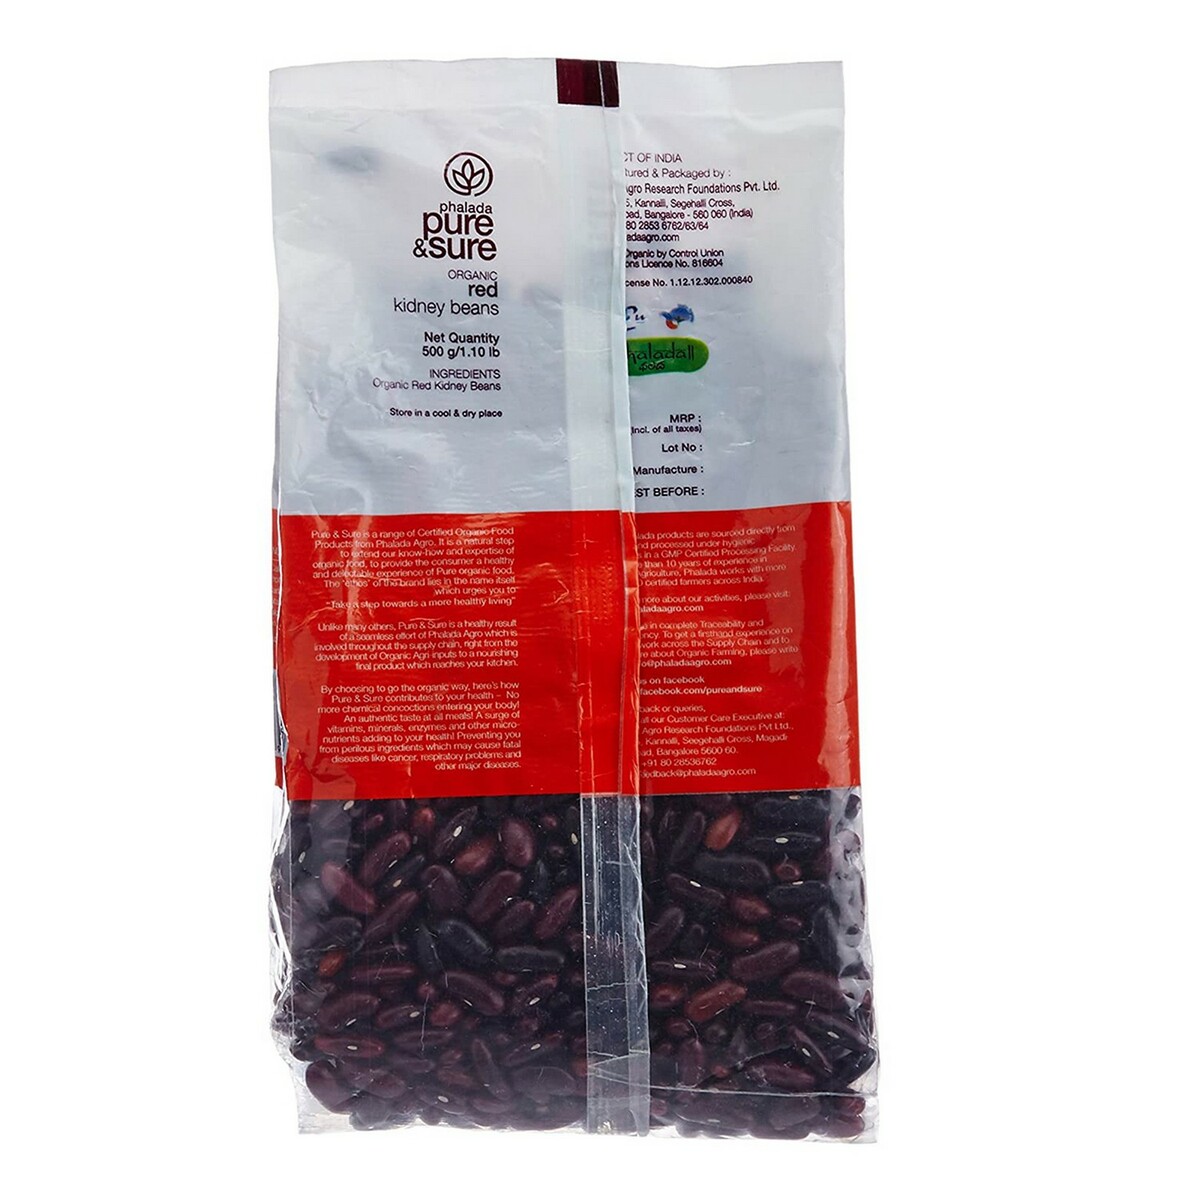 Pure & Sure Organic Kidney Beans Red 500g